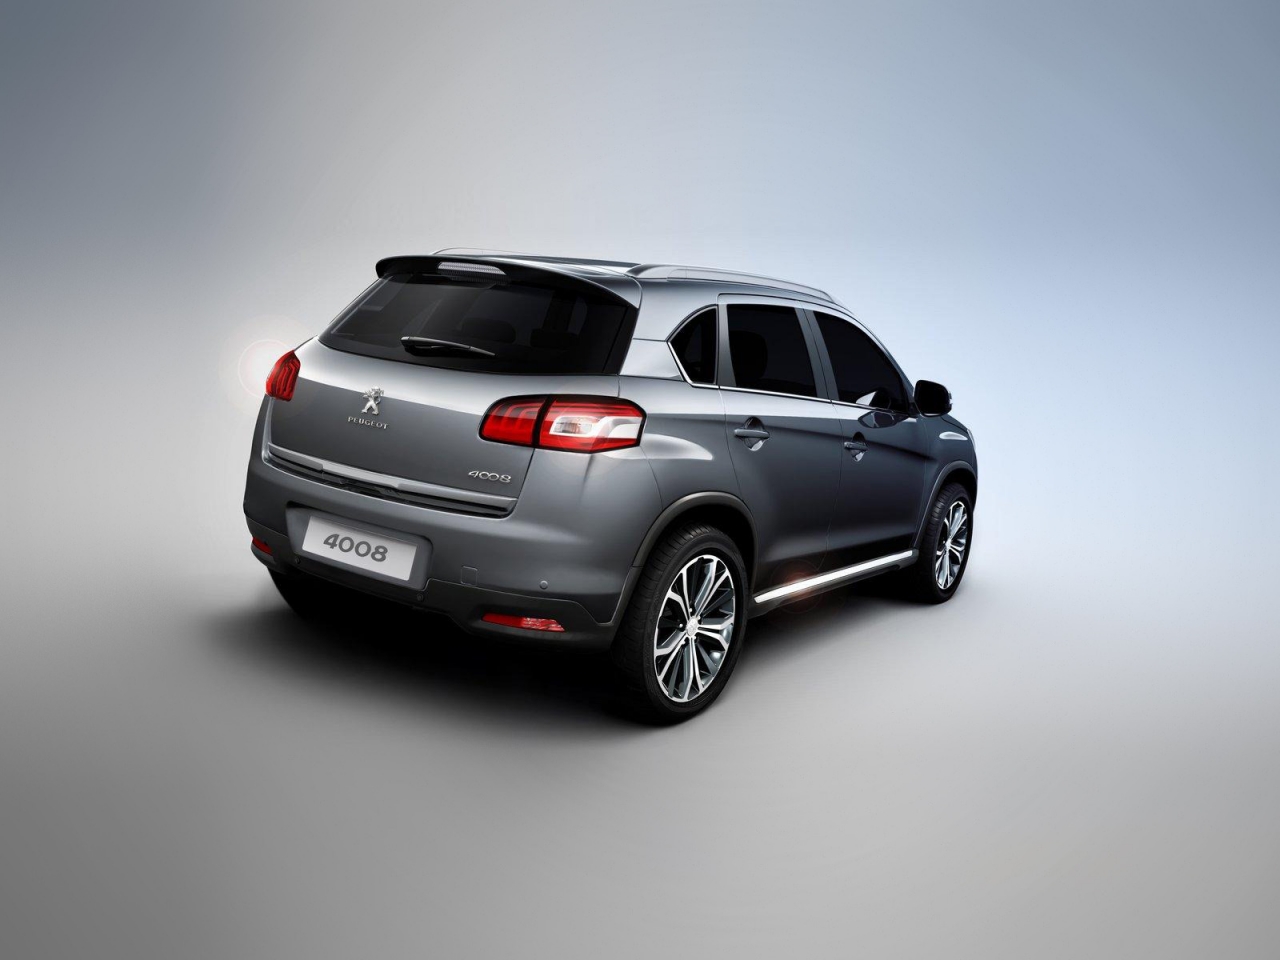 2012 Peugeot 4008 Rear for 1280 x 960 resolution